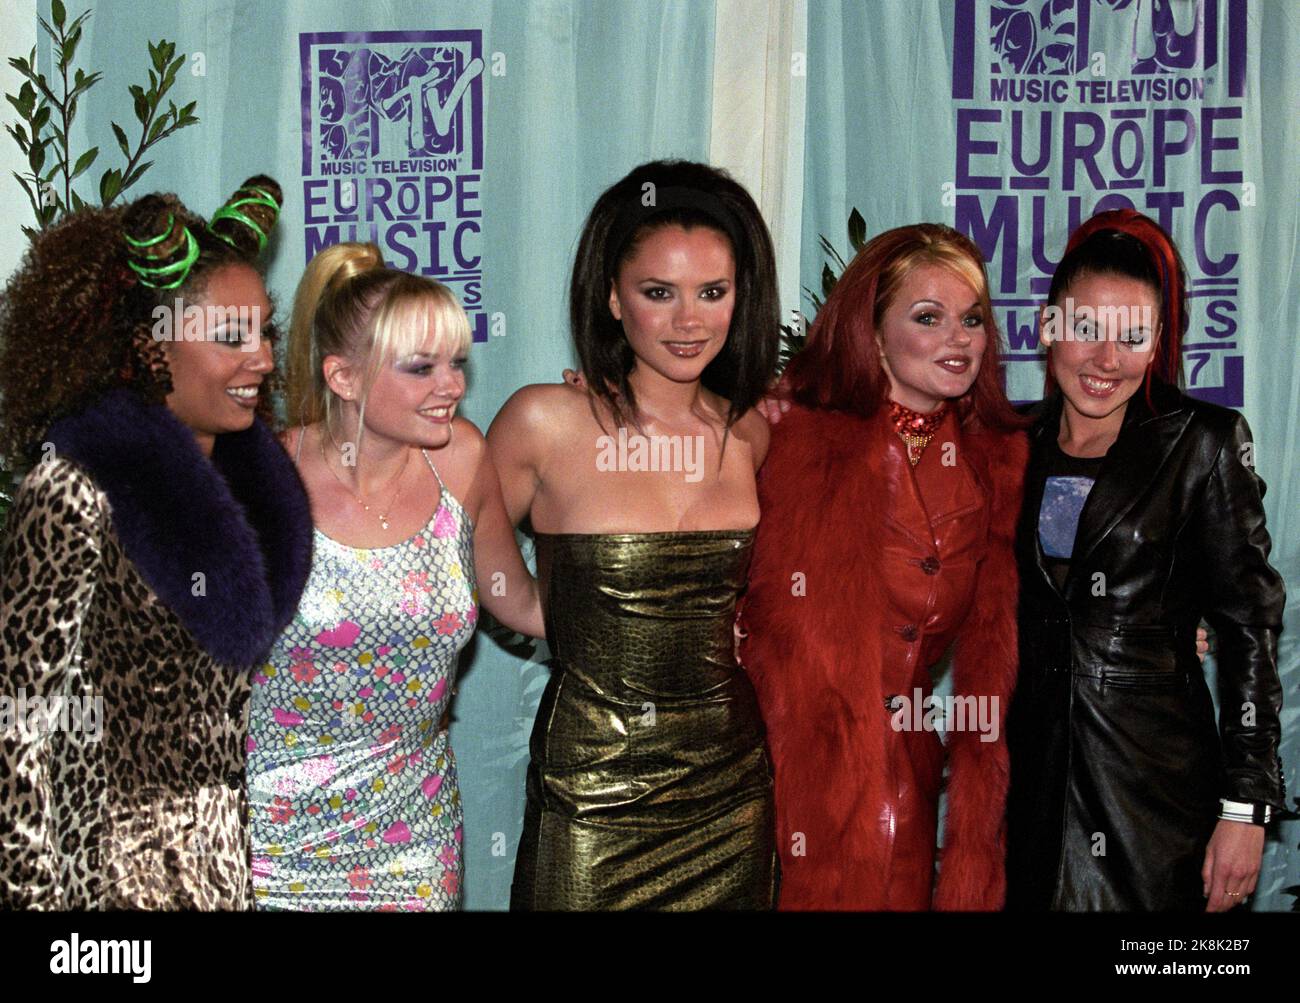 Rotterdam, the Netherlands 19971106. The pop group Spice Girls received one of the awards during the 'The 1997 MTV Europe Music Awards' at the Ahoy Stadium. Eg: Melanie Brown (Mel B), Geri Halliwell, Victoria Adams (later Victoria Beckham), Emma Bunton and Melanie Chisholm Photo Lise Åserud / NTB / NTB Stock Photo